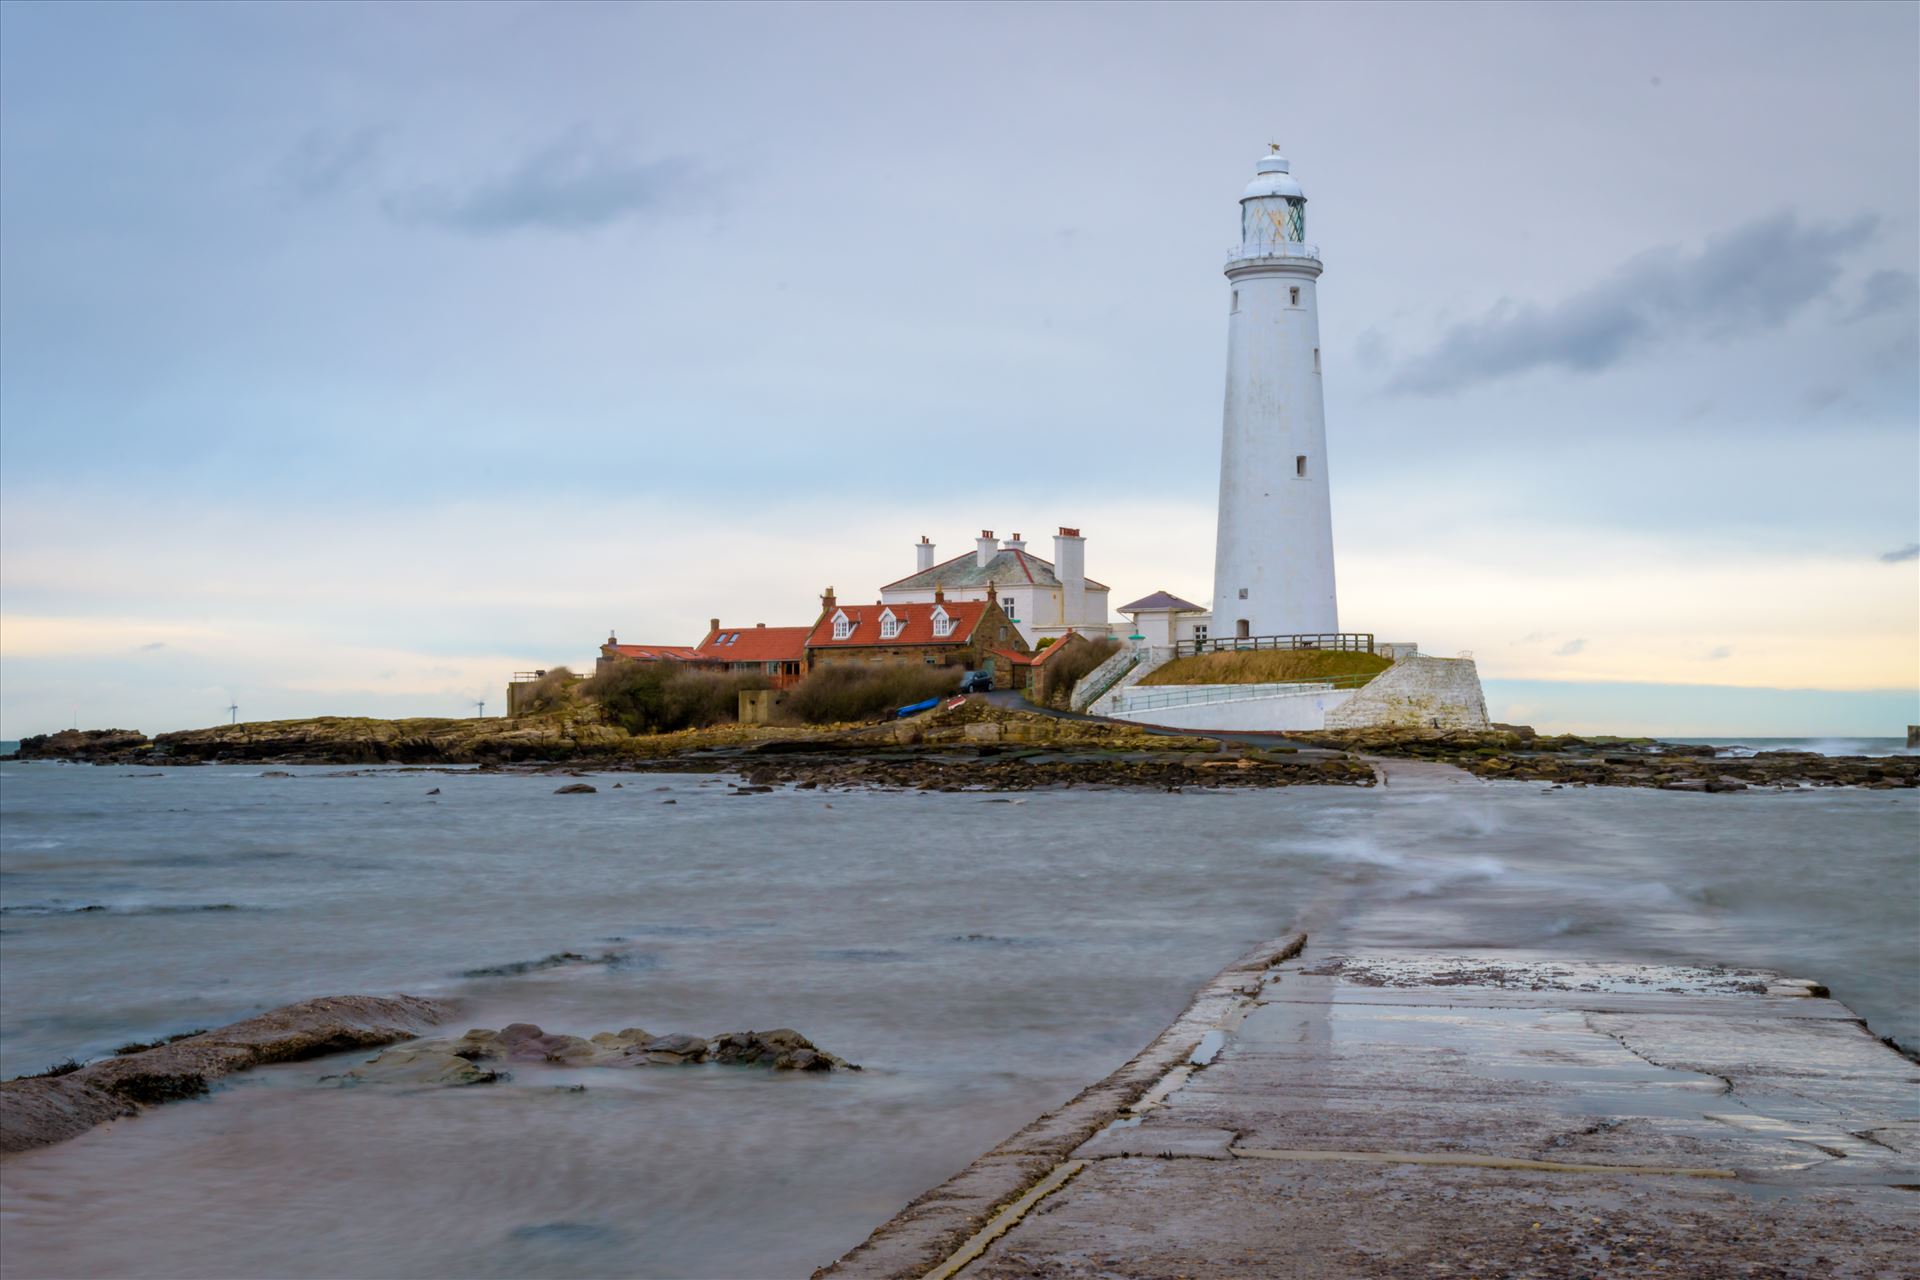 St Mary's Island, Whitley Bay. St. Mary's Island was originally called Bates Island, Hartley Bates or Bates Hill as it was originally owned by the Bates family.

The lighthouse continued to function until 1984, when it was taken out of service. The lighthouse is now open to visitors. by Graham Dobson Photography